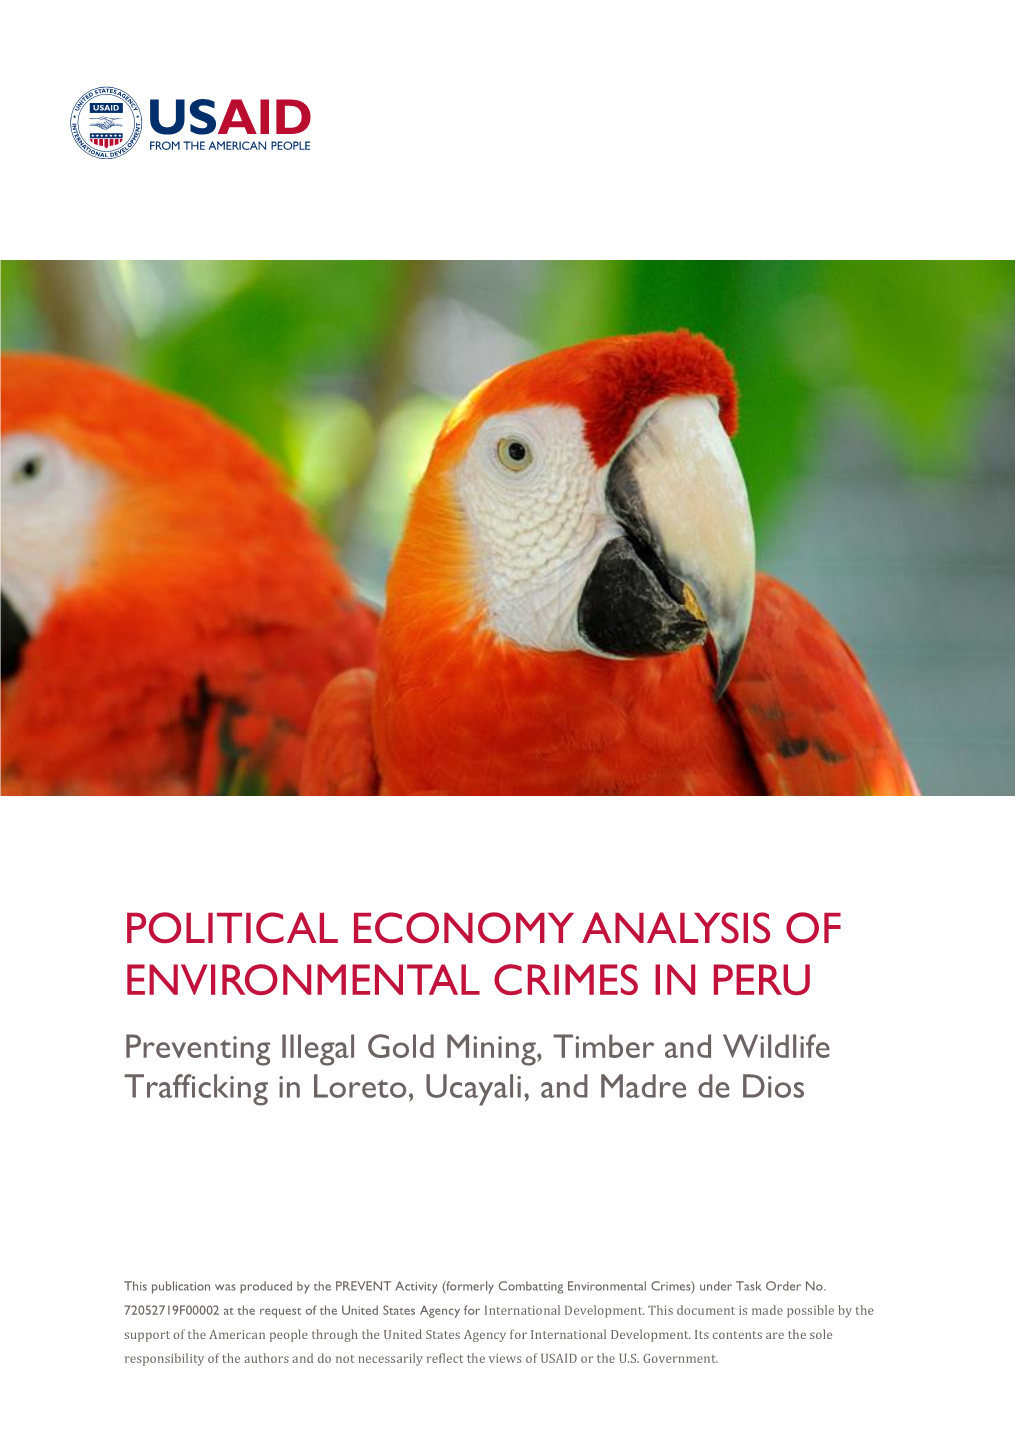 POLITICAL ECONOMY ANALYSIS of ENVIRONMENTAL CRIMES in PERU Preventing Illegal Gold Mining, Timber and Wildlife Trafficking in Loreto, Ucayali, and Madre De Dios